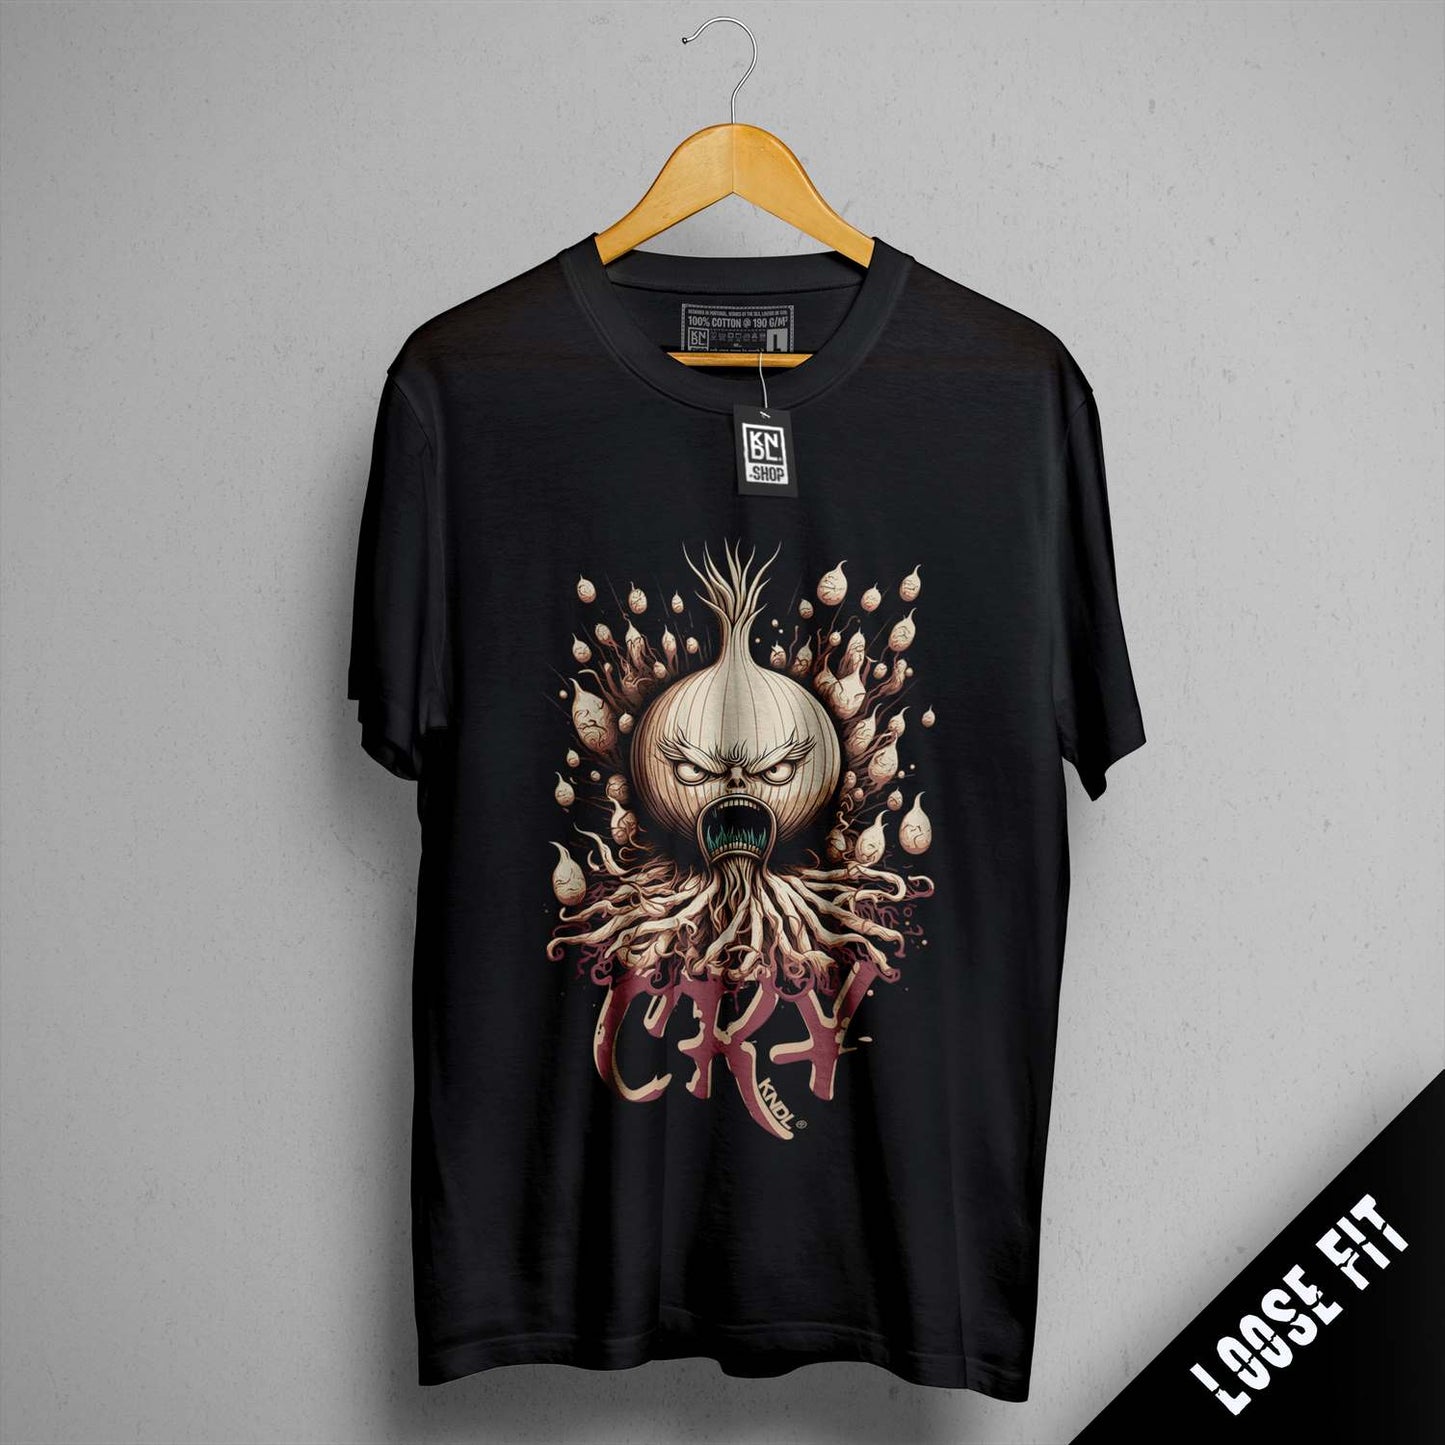 a black t - shirt with a picture of an onion on it